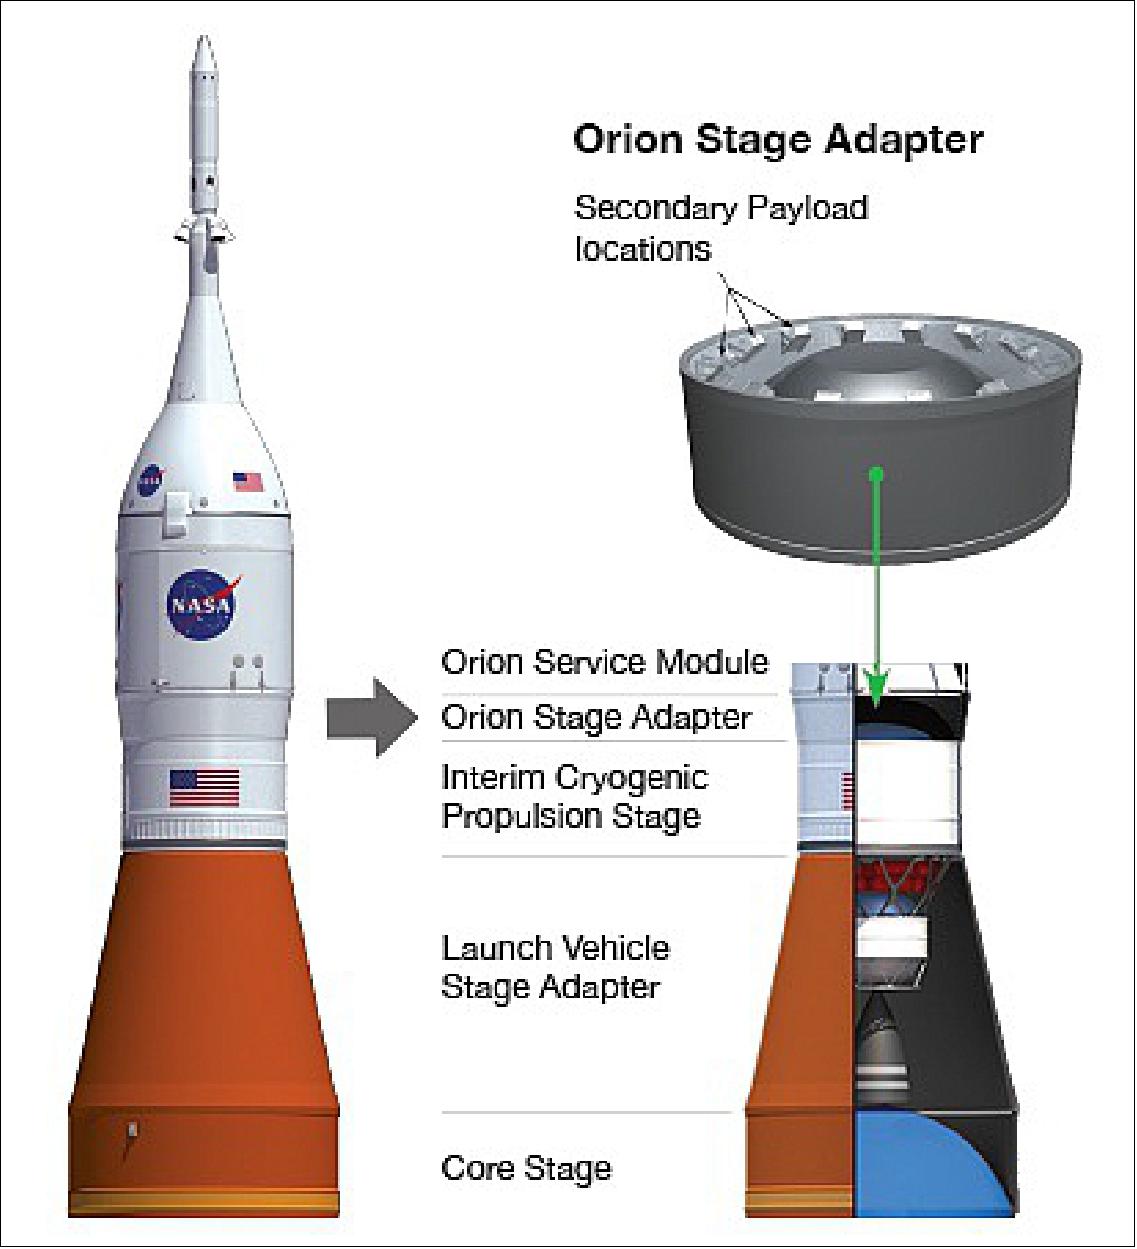 Figure 33: The CubeSats will be deployed from the Orion Stage Adapter (image credit: NASA, Ref. 34)